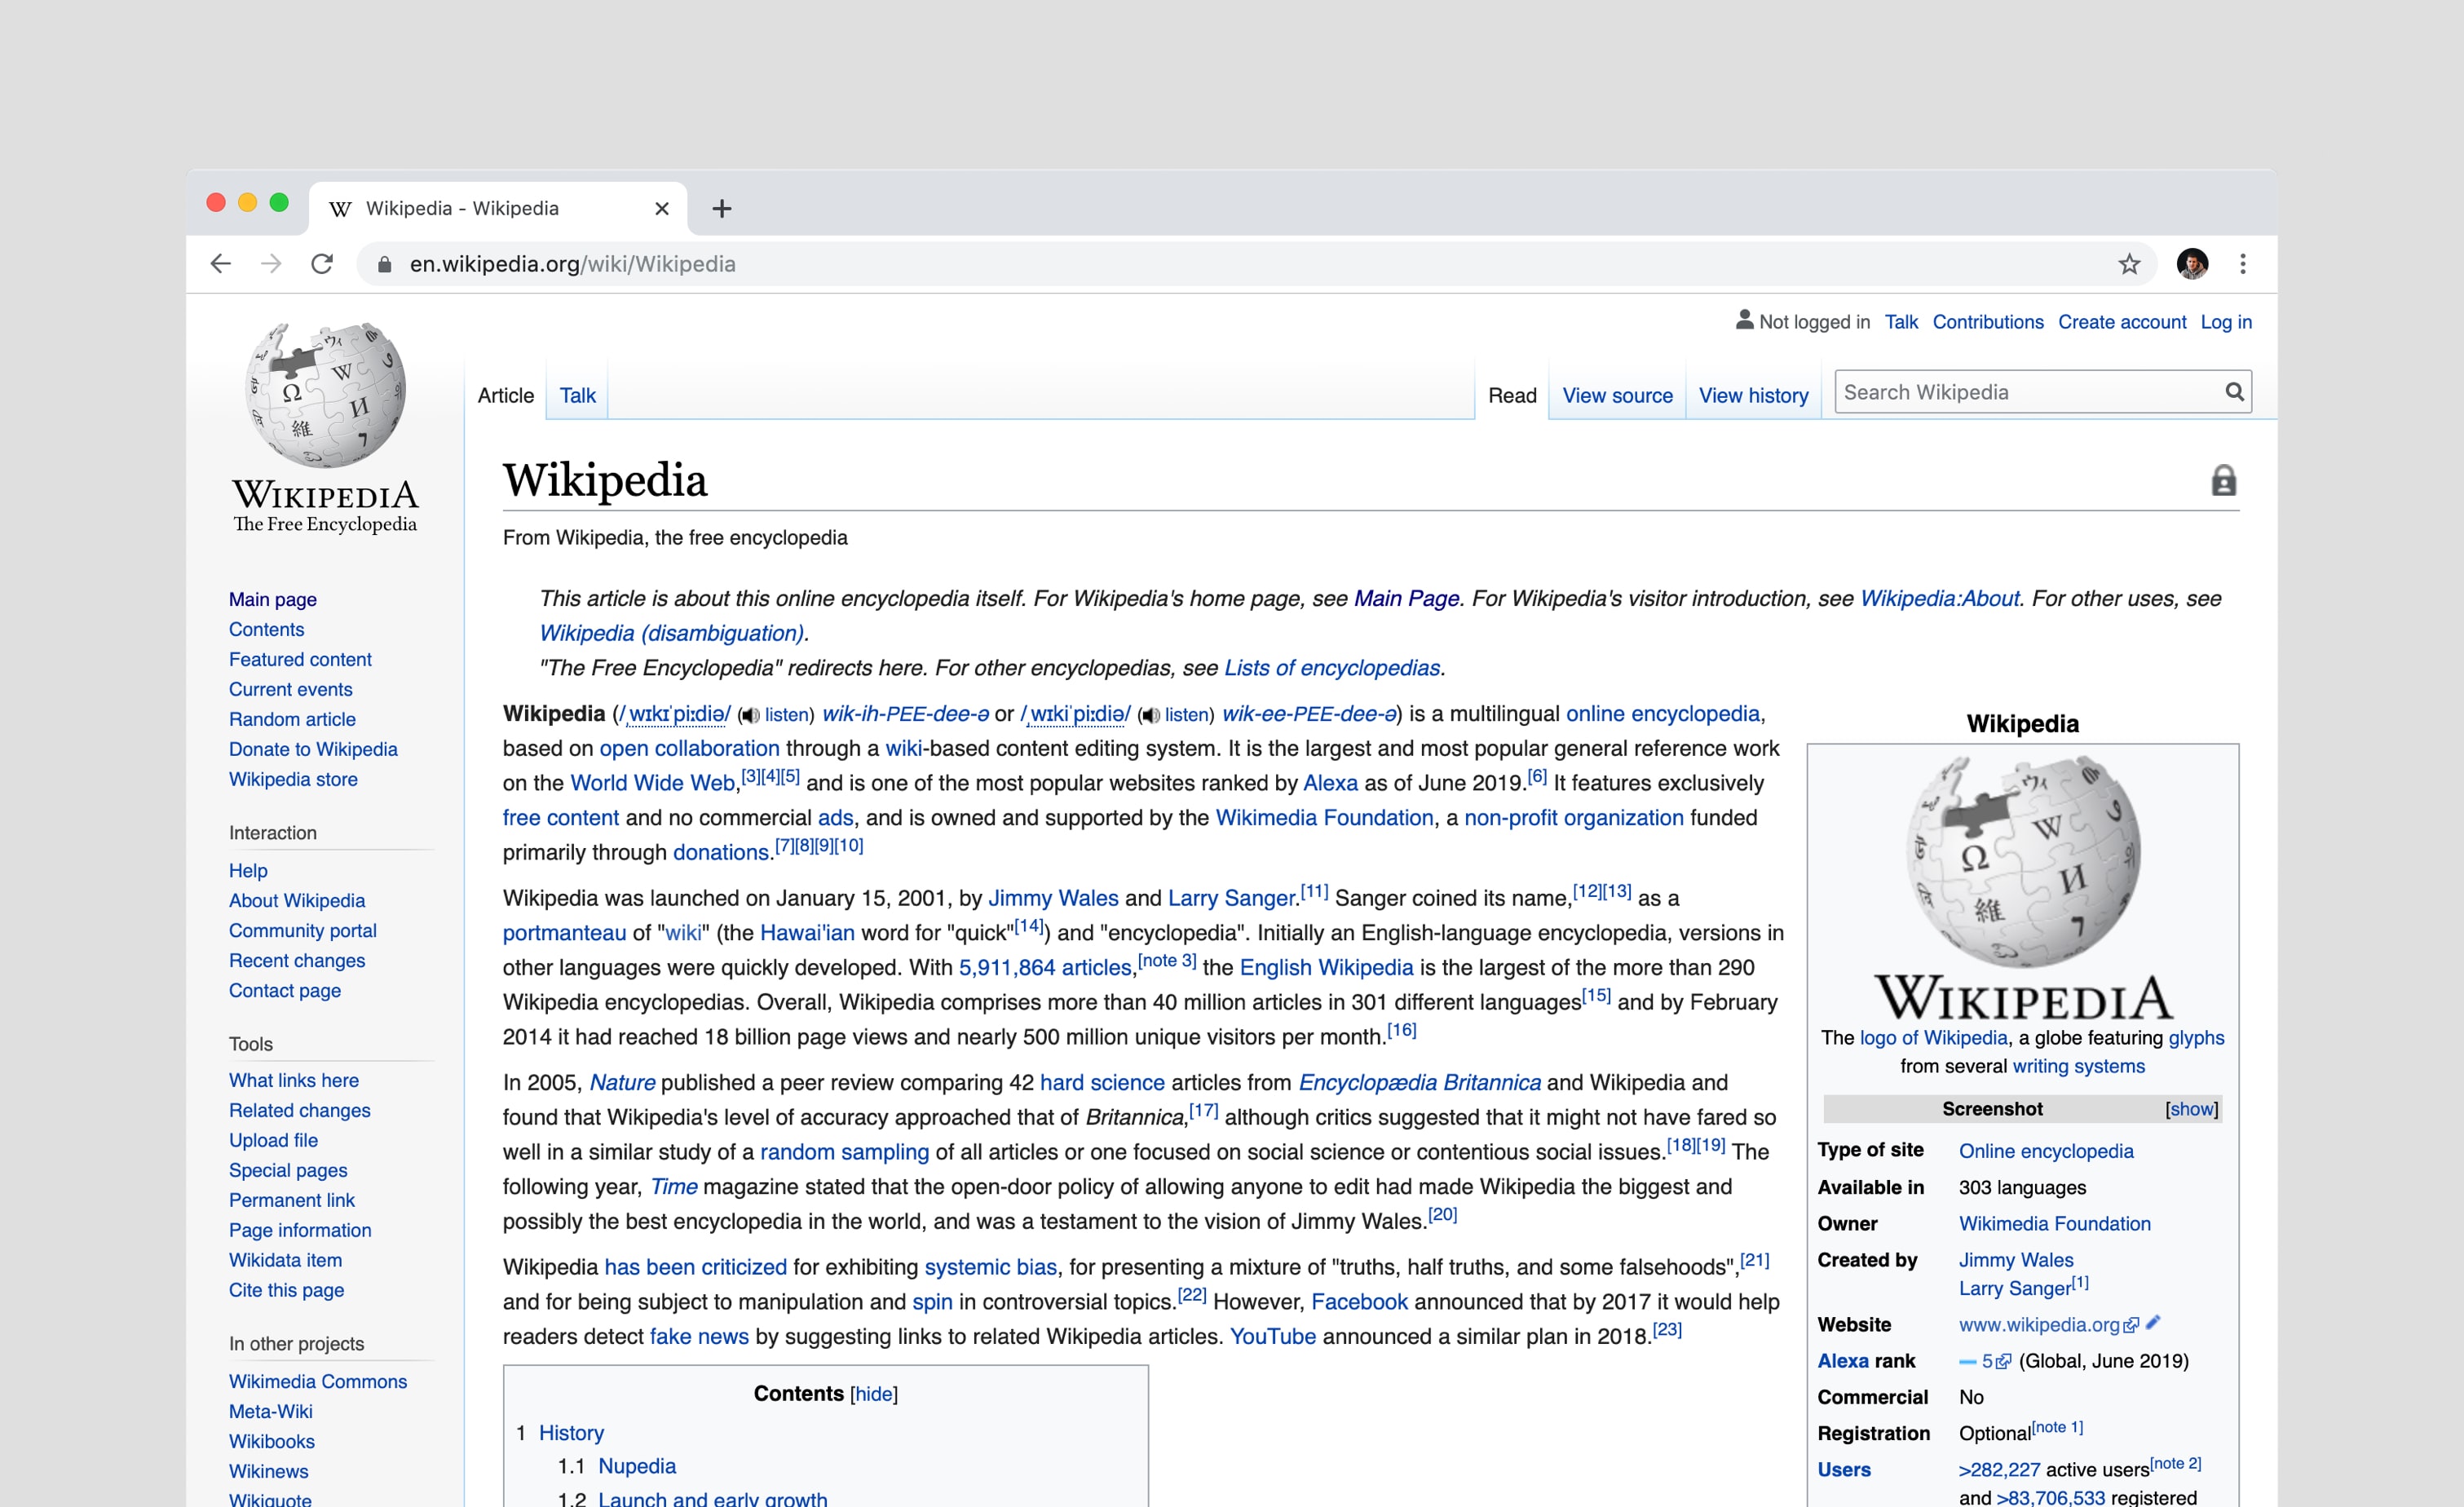 how to create a wikipedia page for your company